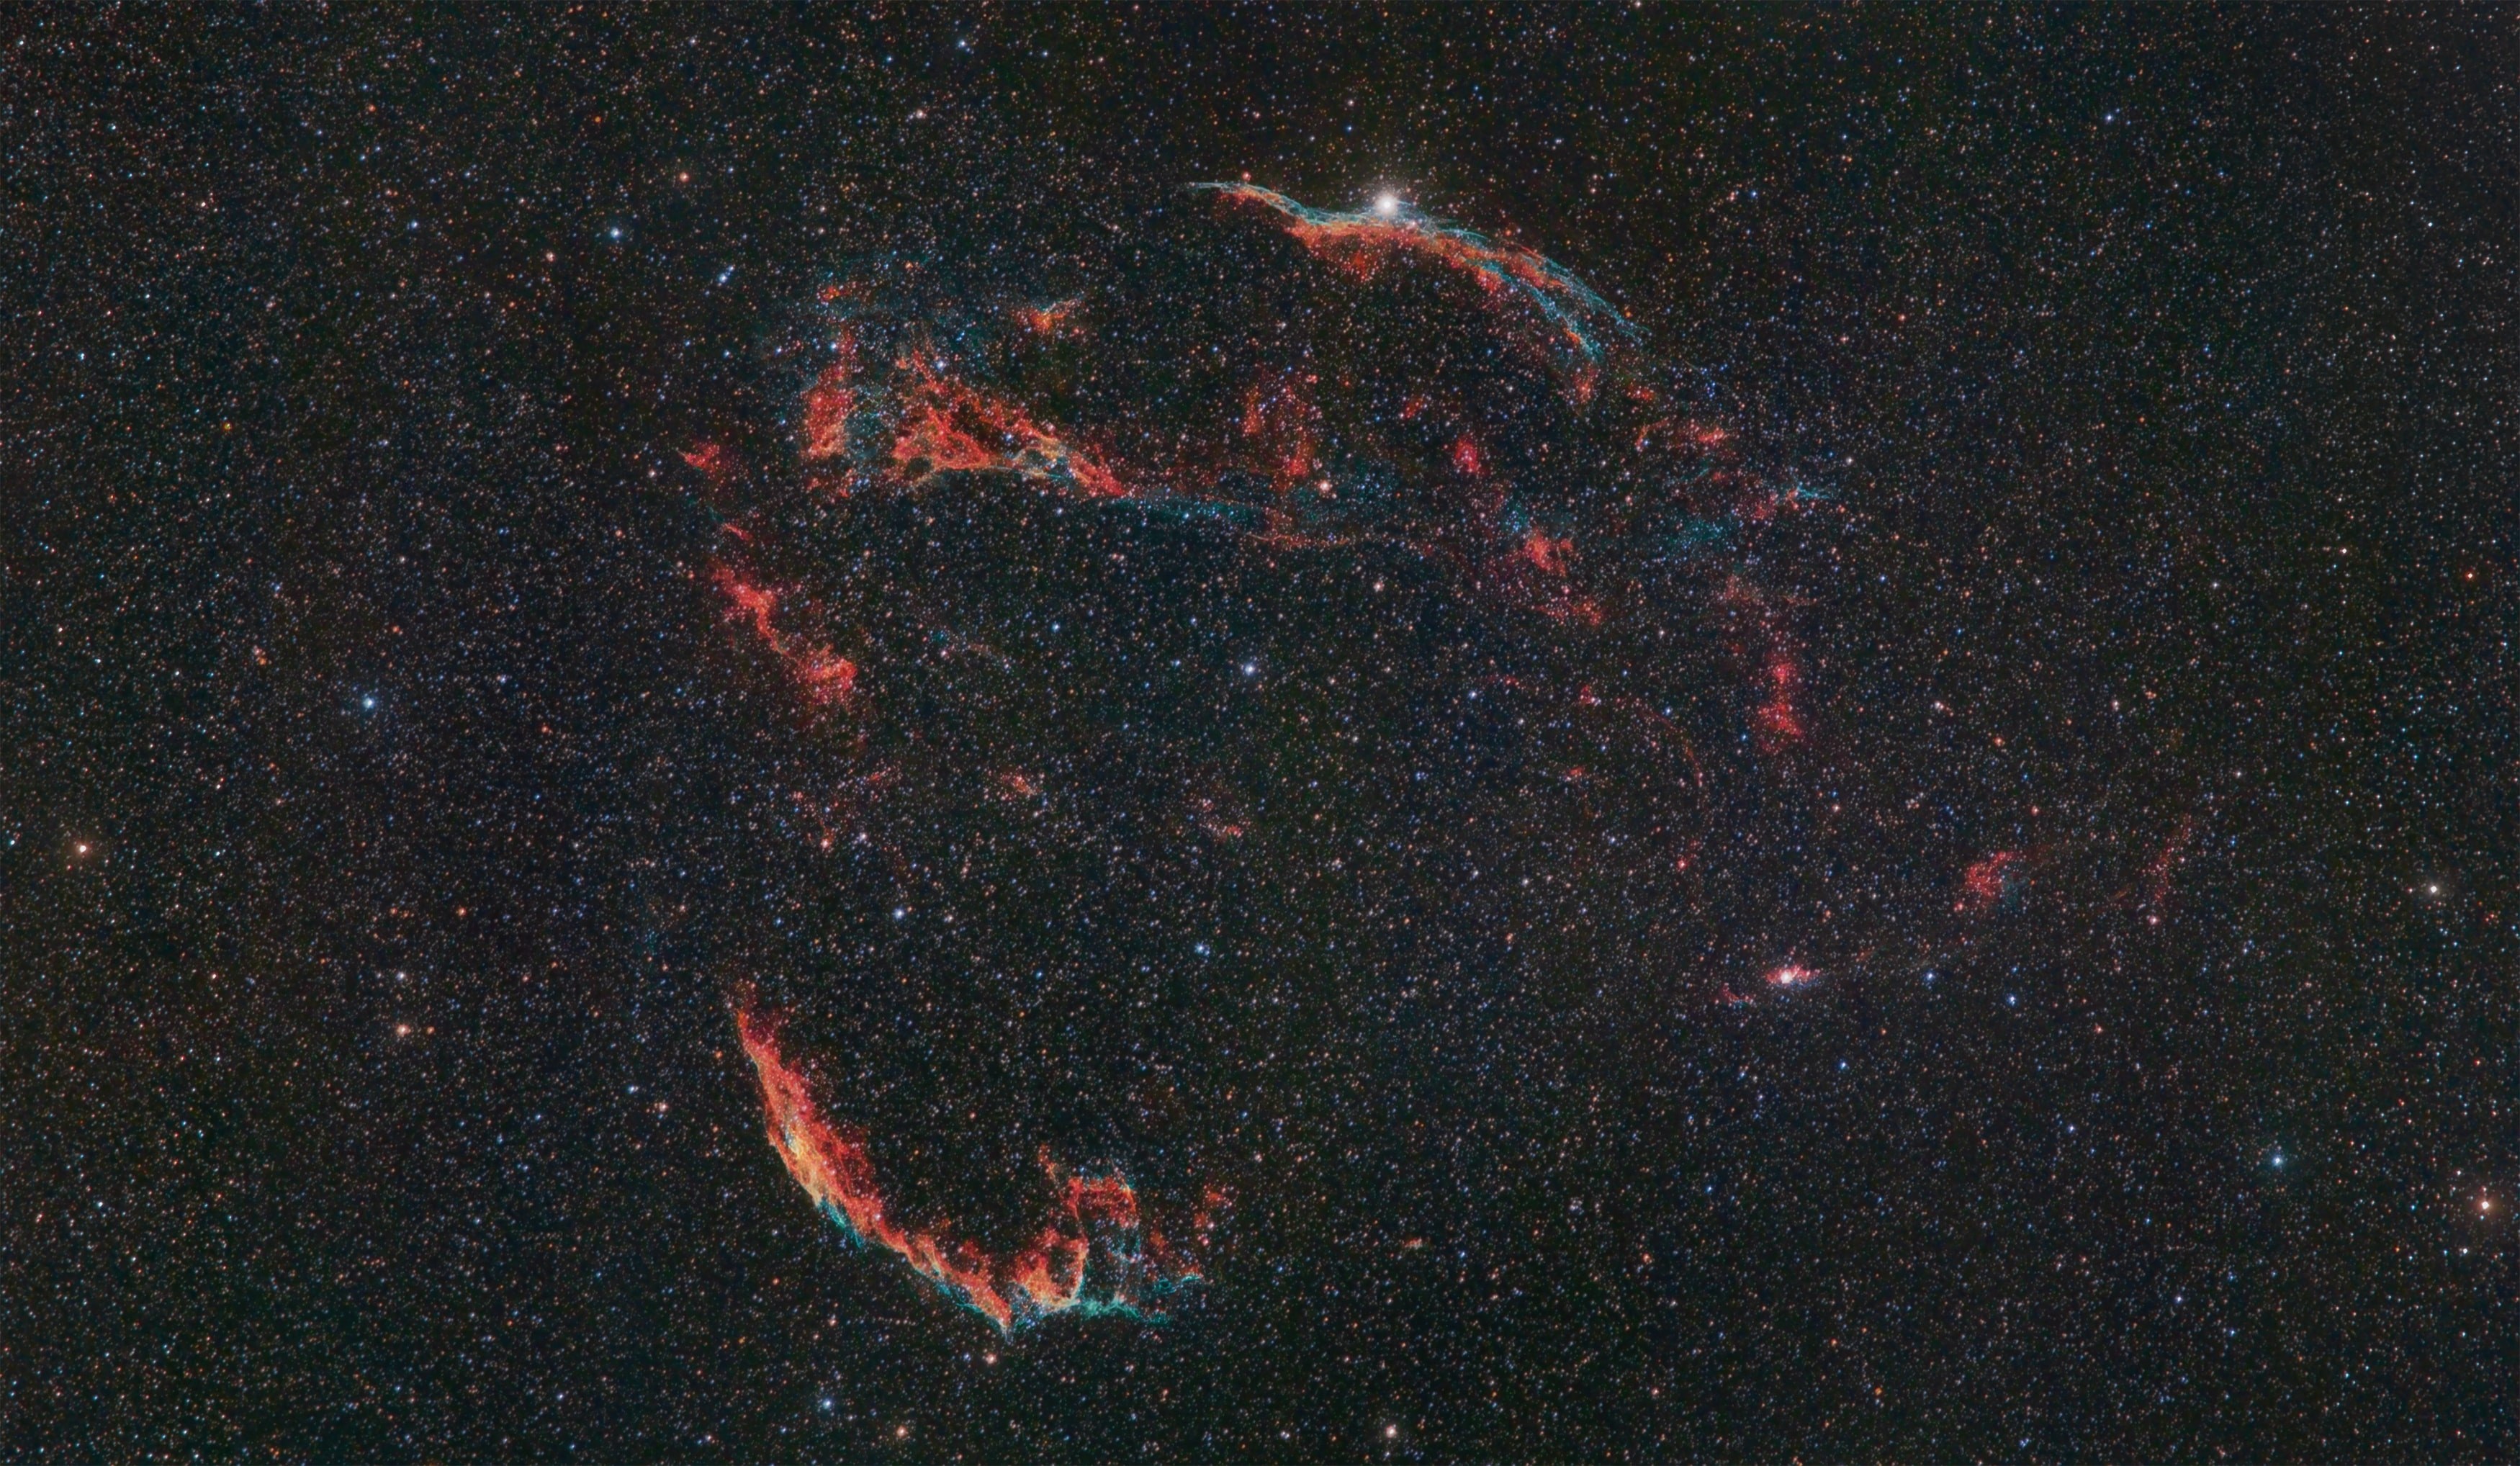 Photo by Neven Krcmarek: Veil nebula, remnant of a dying star and astronomical mystery